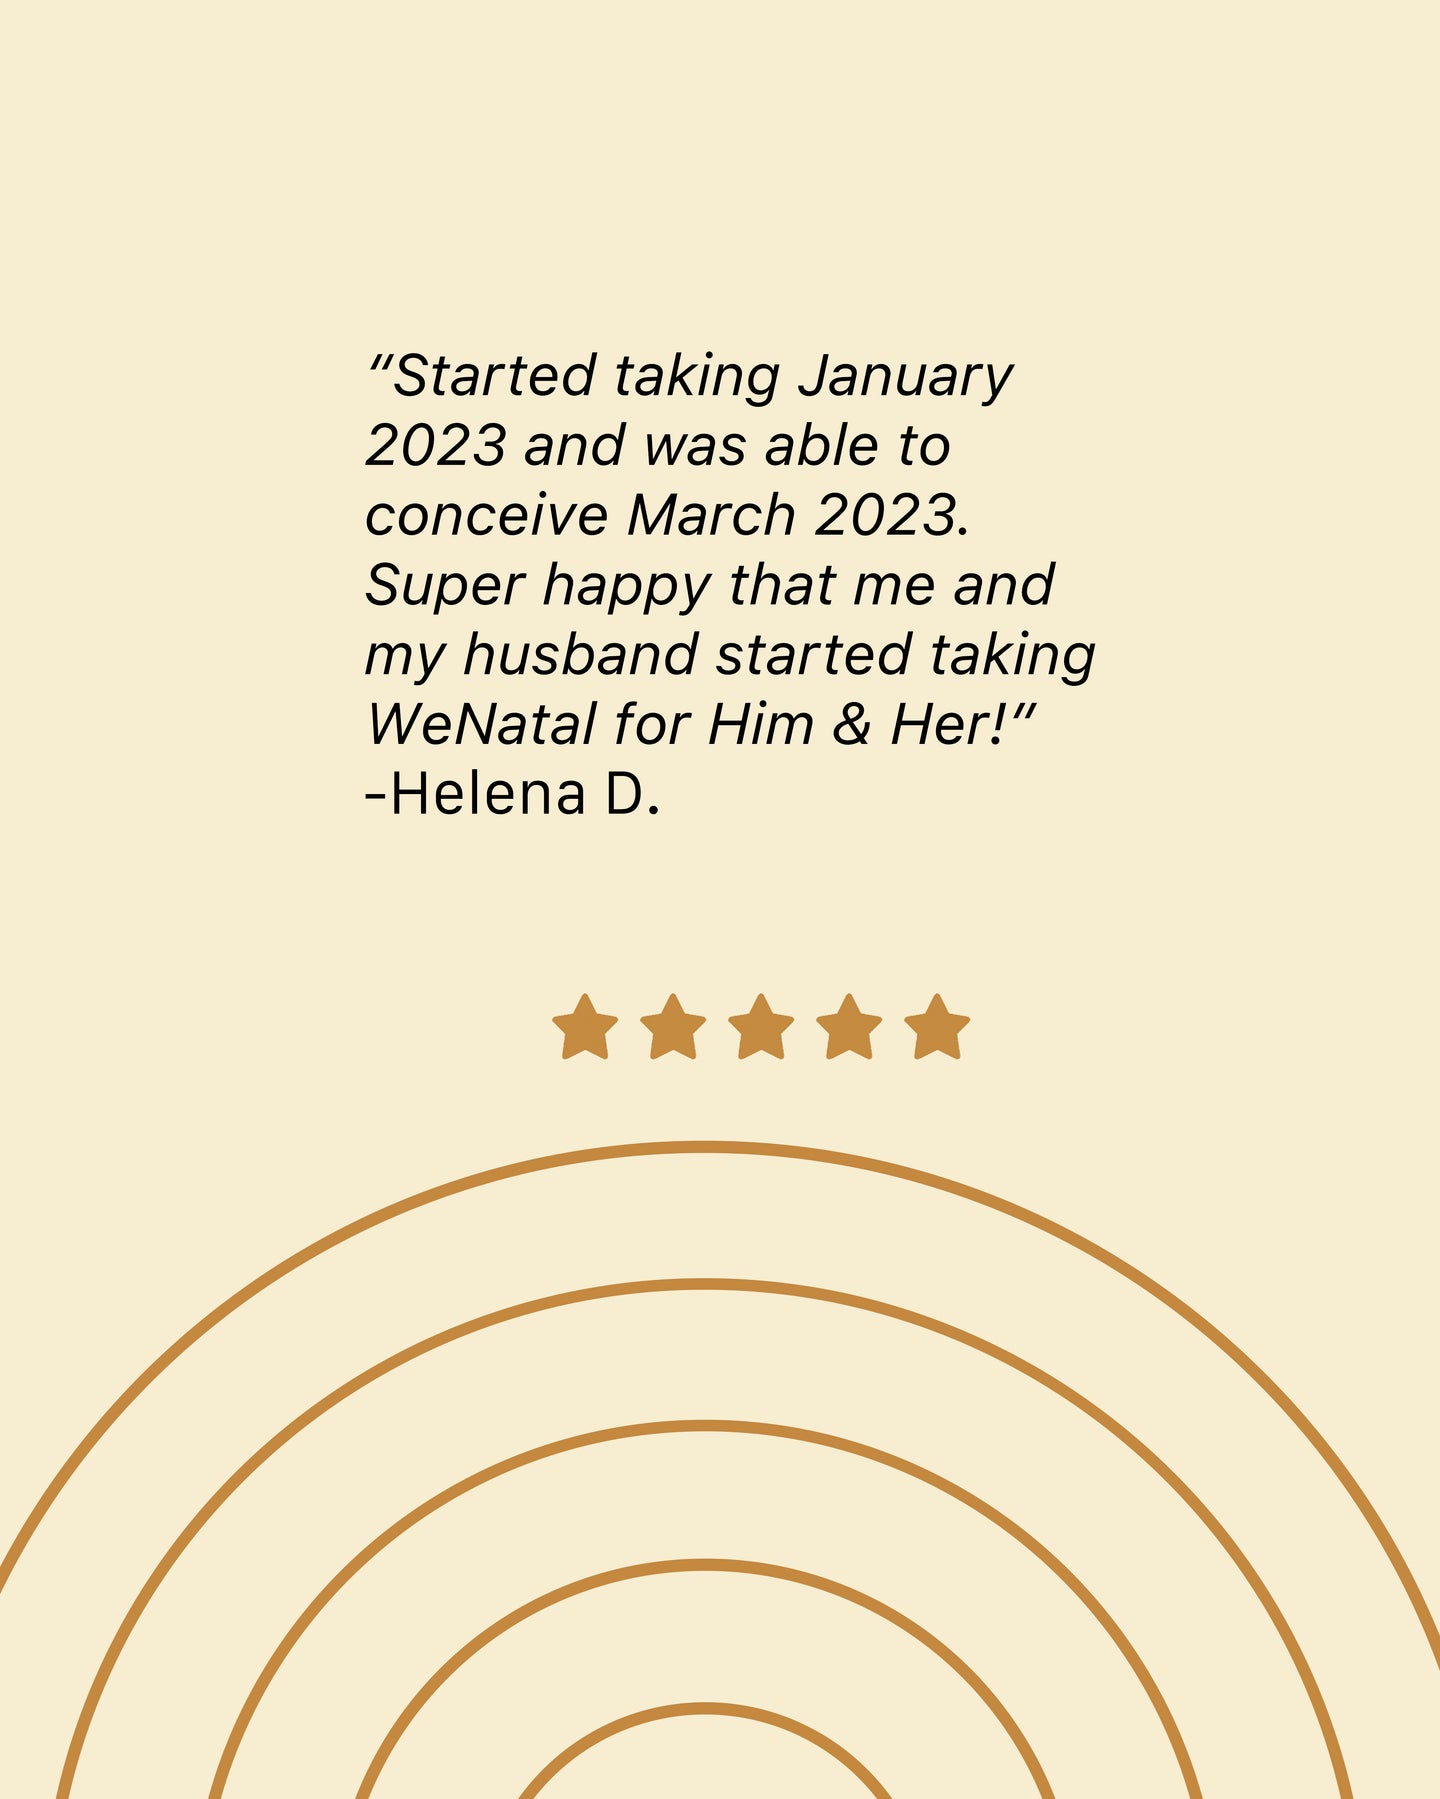 A review left by Helena D Started taking in January2023 and was able to conceive March 2023 super happy that me and my husband started taking WeNatal for Him and Her